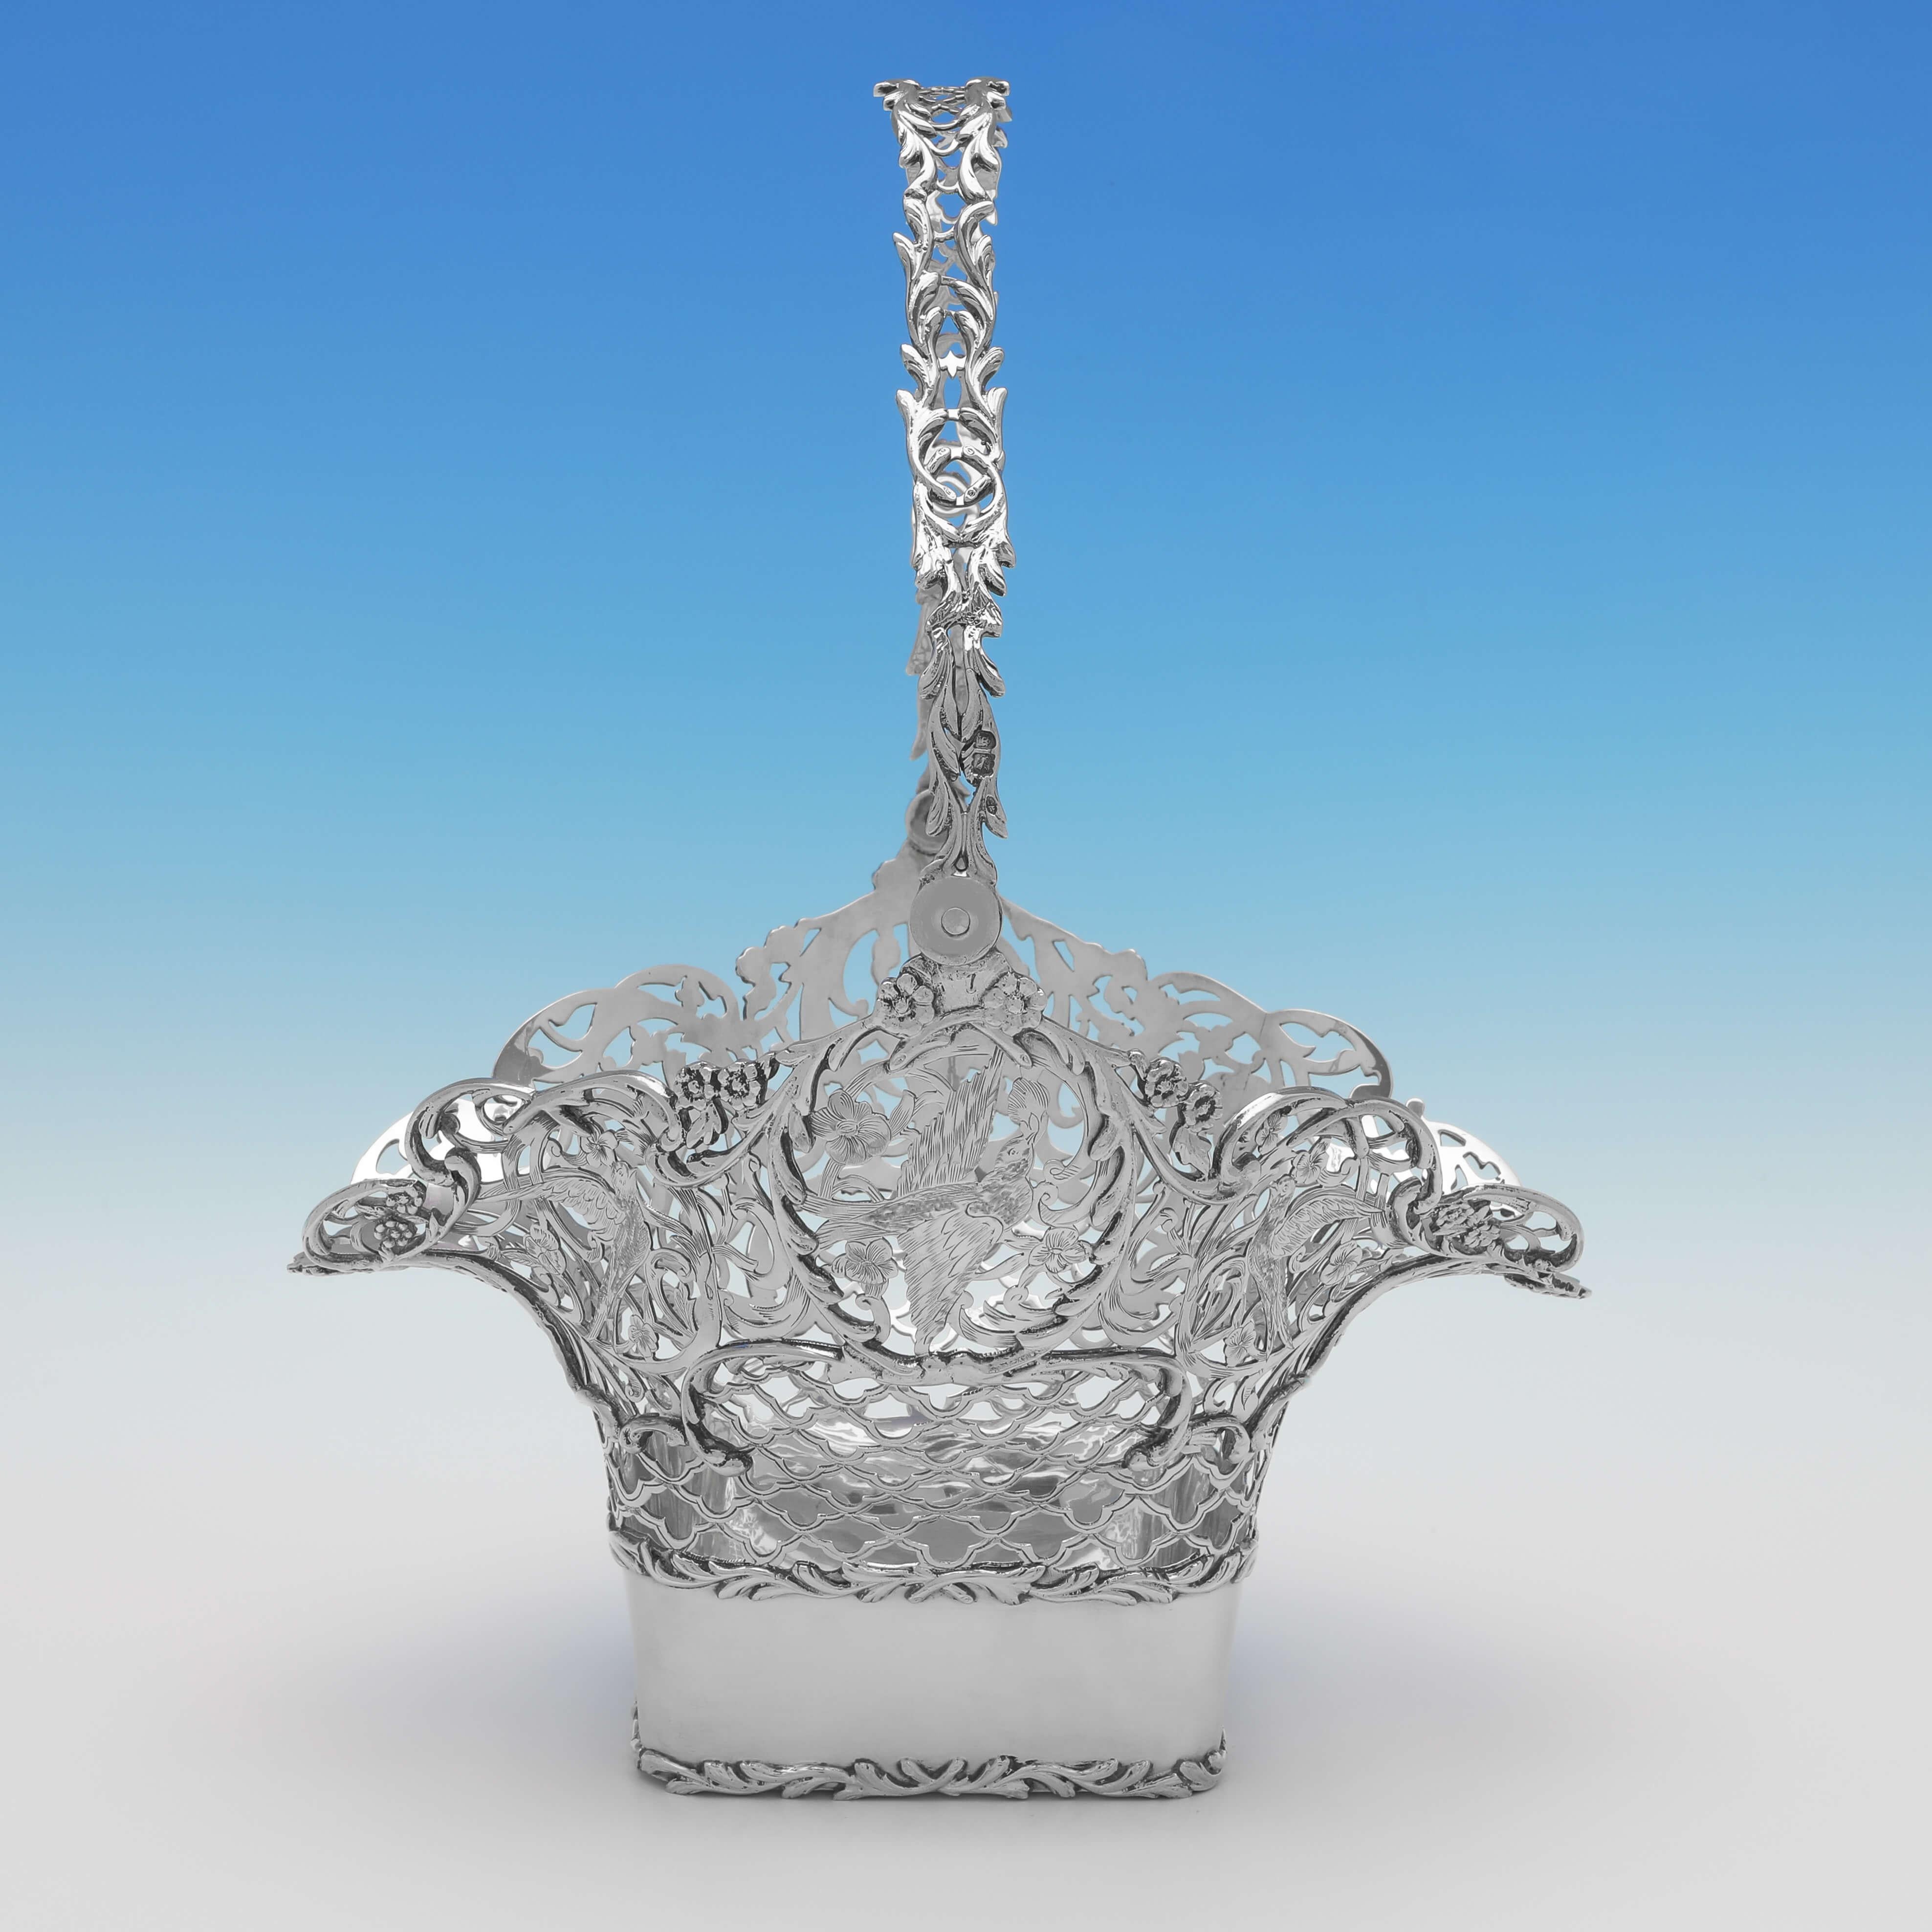 Hallmarked in London in 1907 by Elkington & Co., this striking, antique sterling silver basket, features pierced and engraved sides depicting birds and floral motifs, and a cast acanthus border and pierced handle. The basket measures 7.75